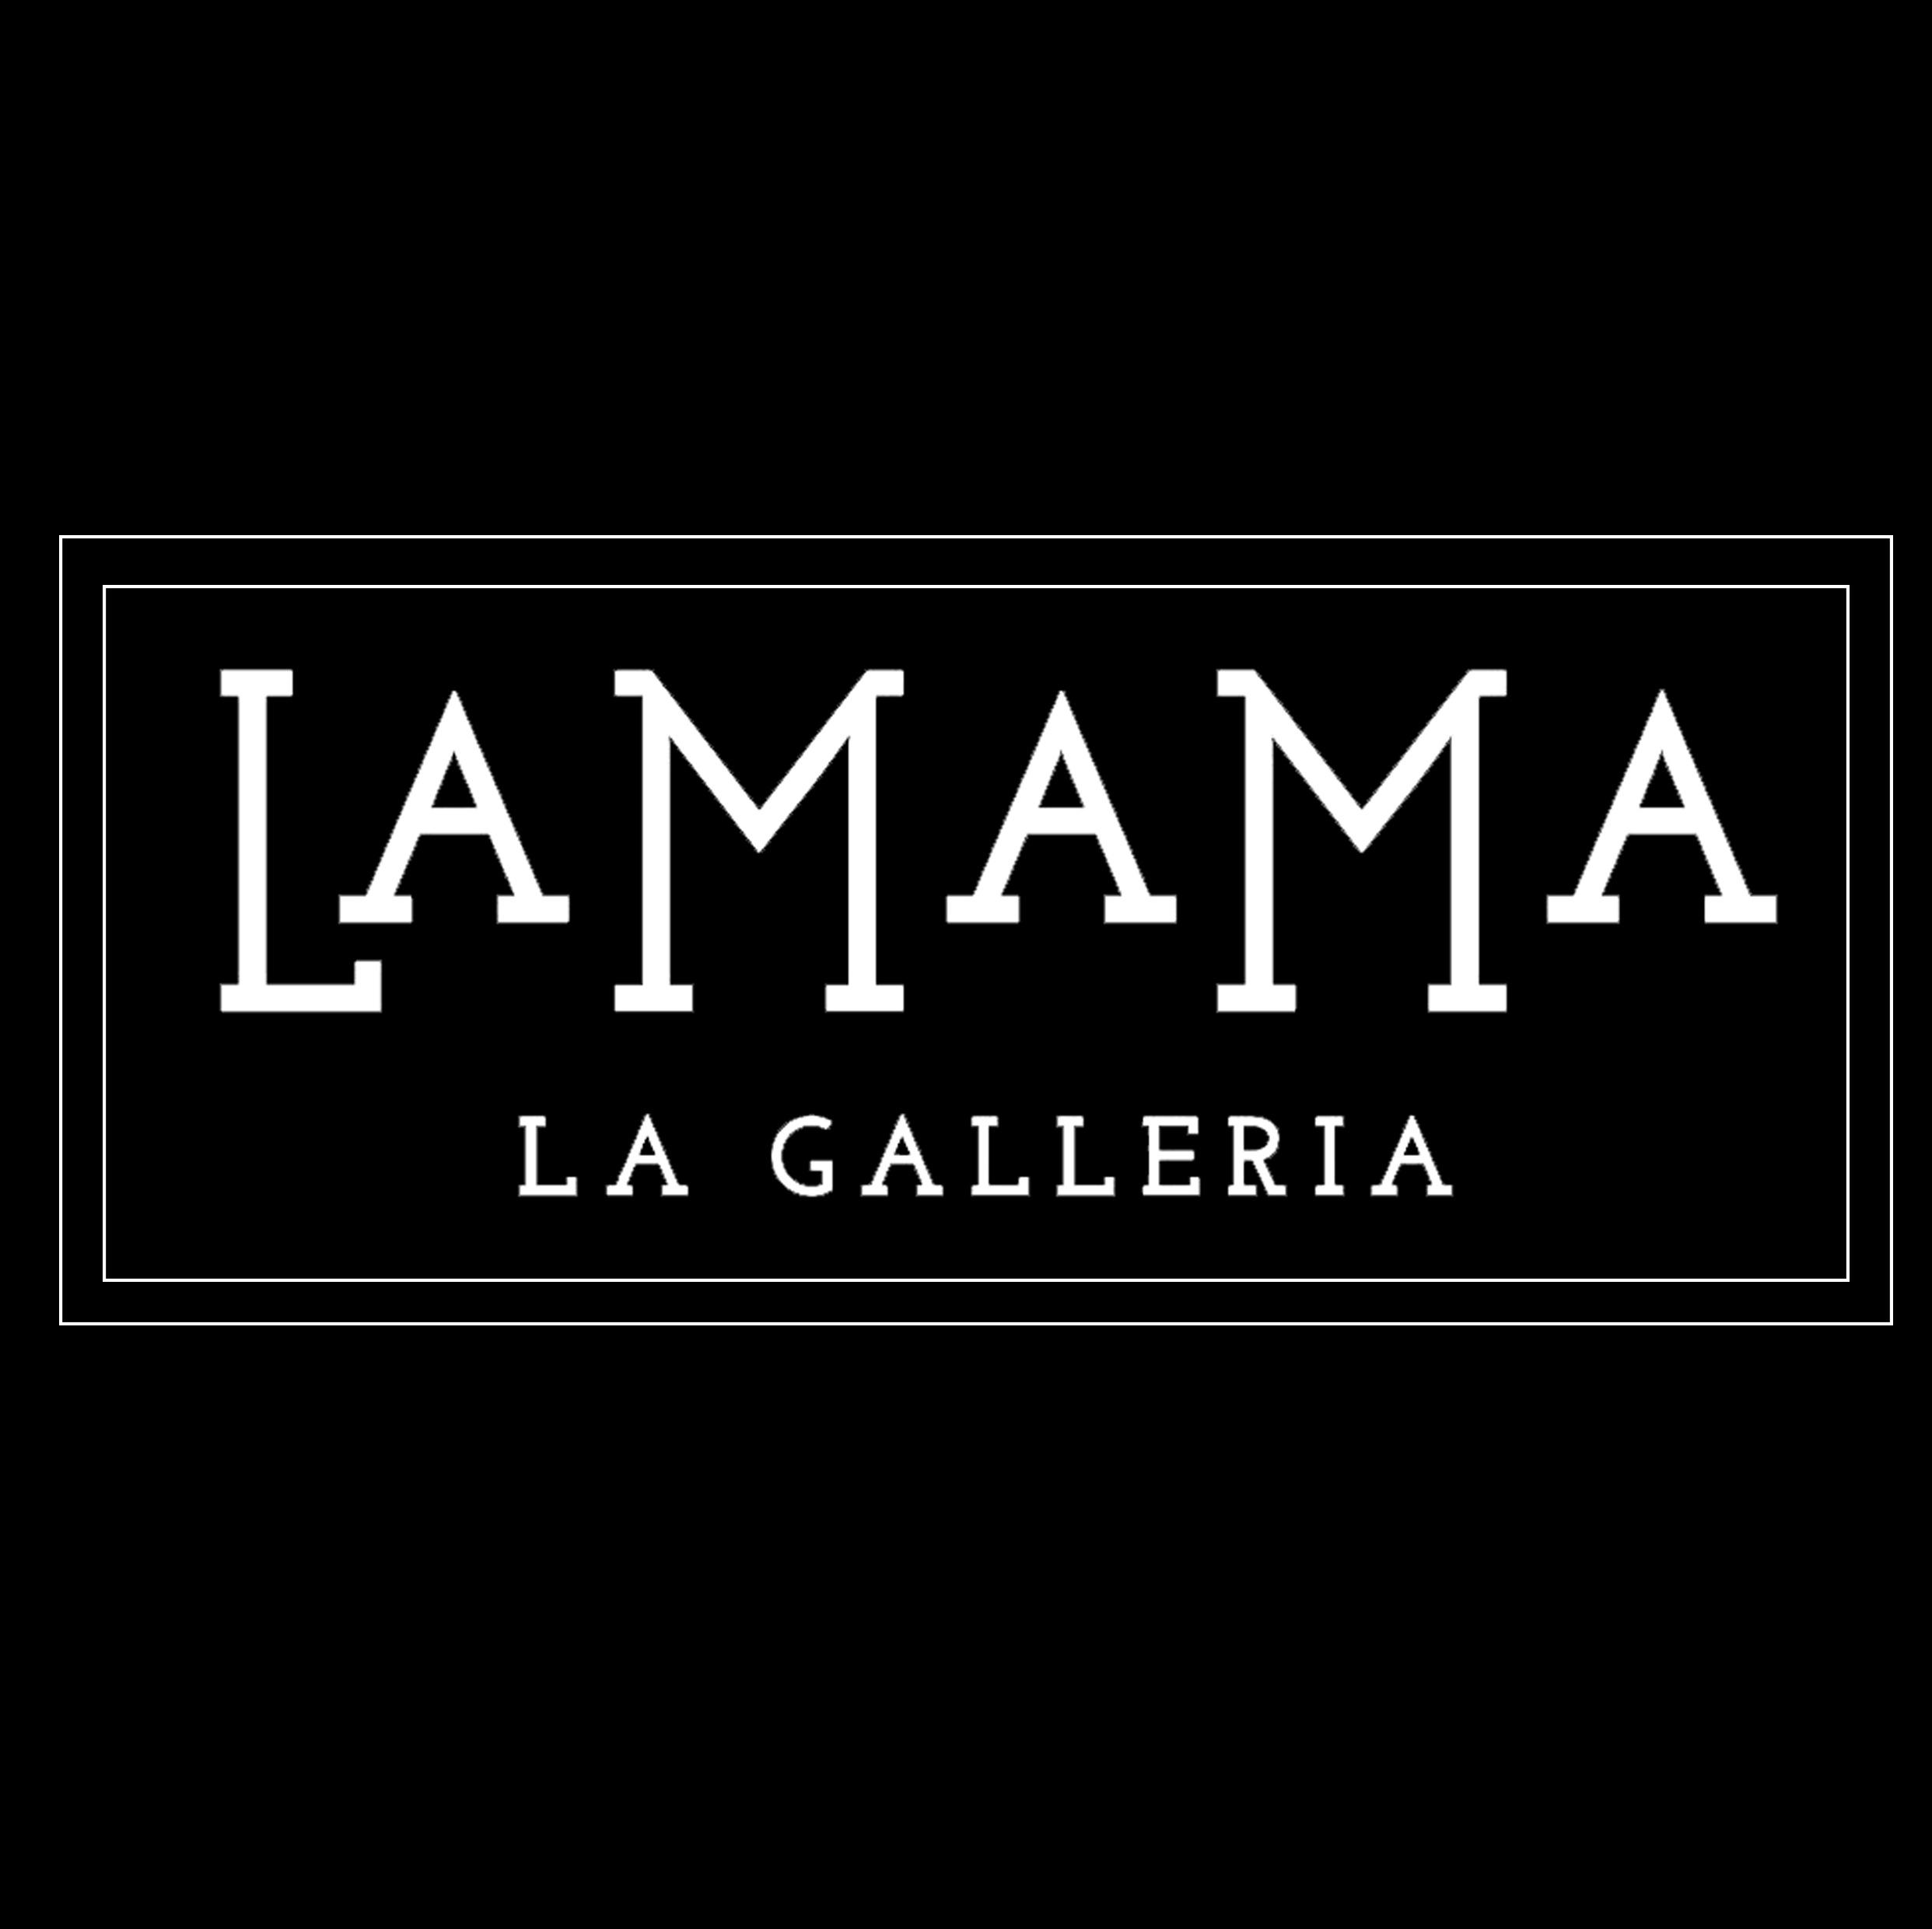 Non-profit art gallery in New York City's East Village, NYC. Part of @lamamaetc